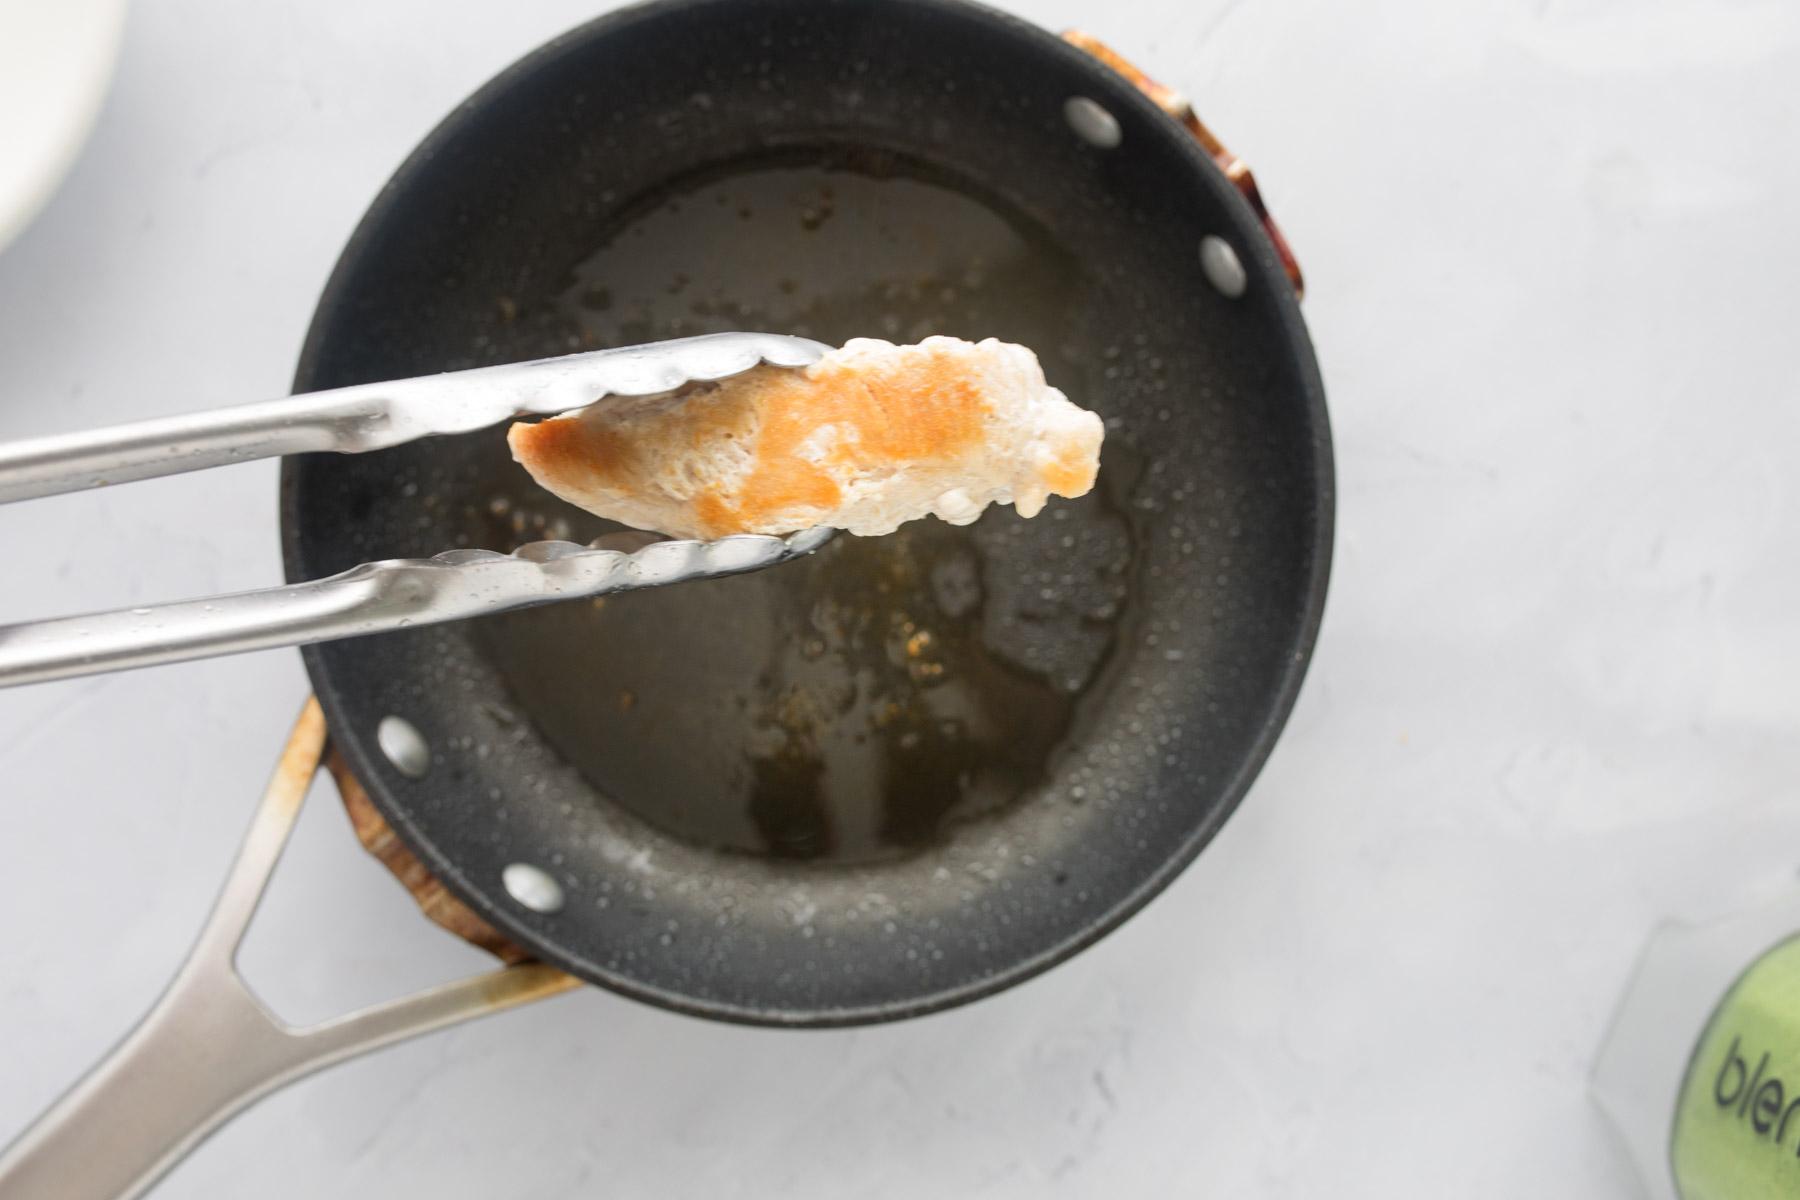 tongs holding a chicken tender over a frying pan